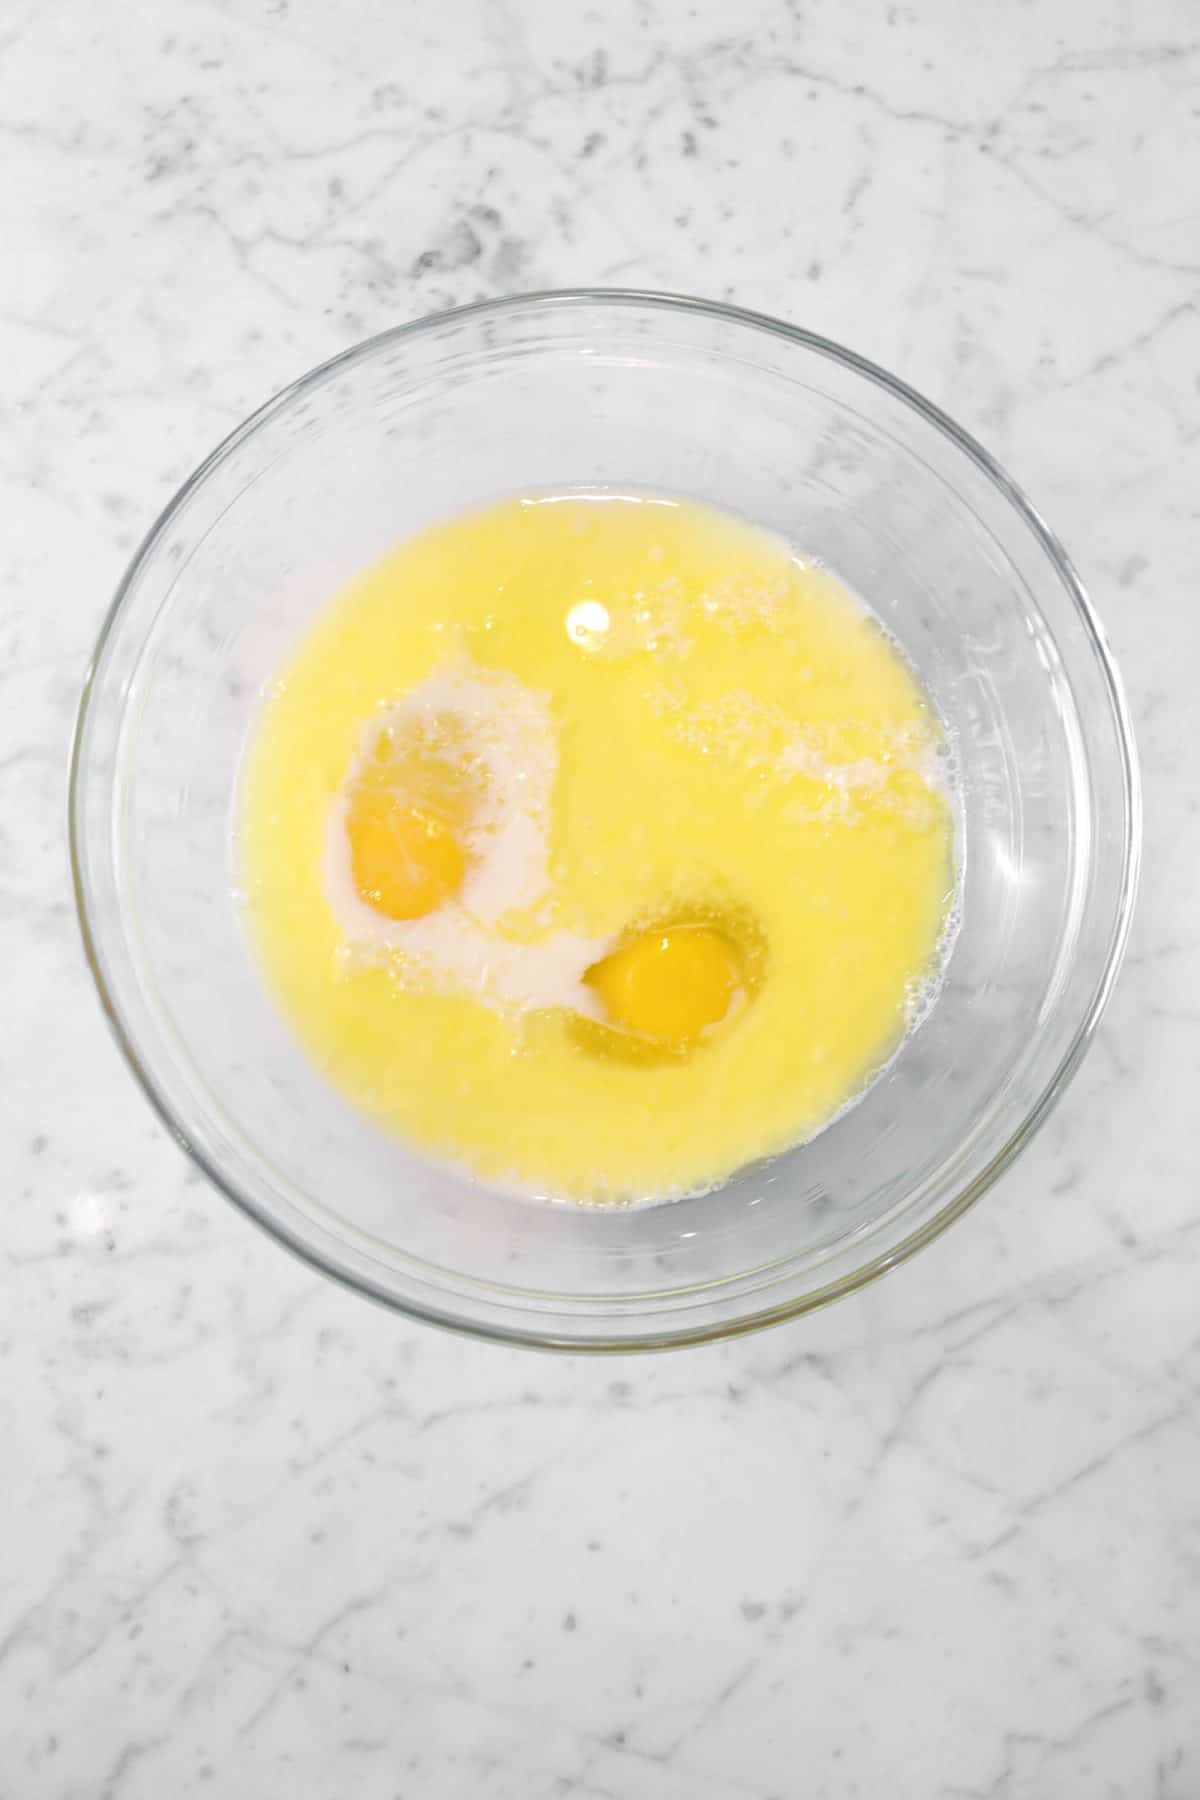 milk, butter, and eggs in a glass bowl